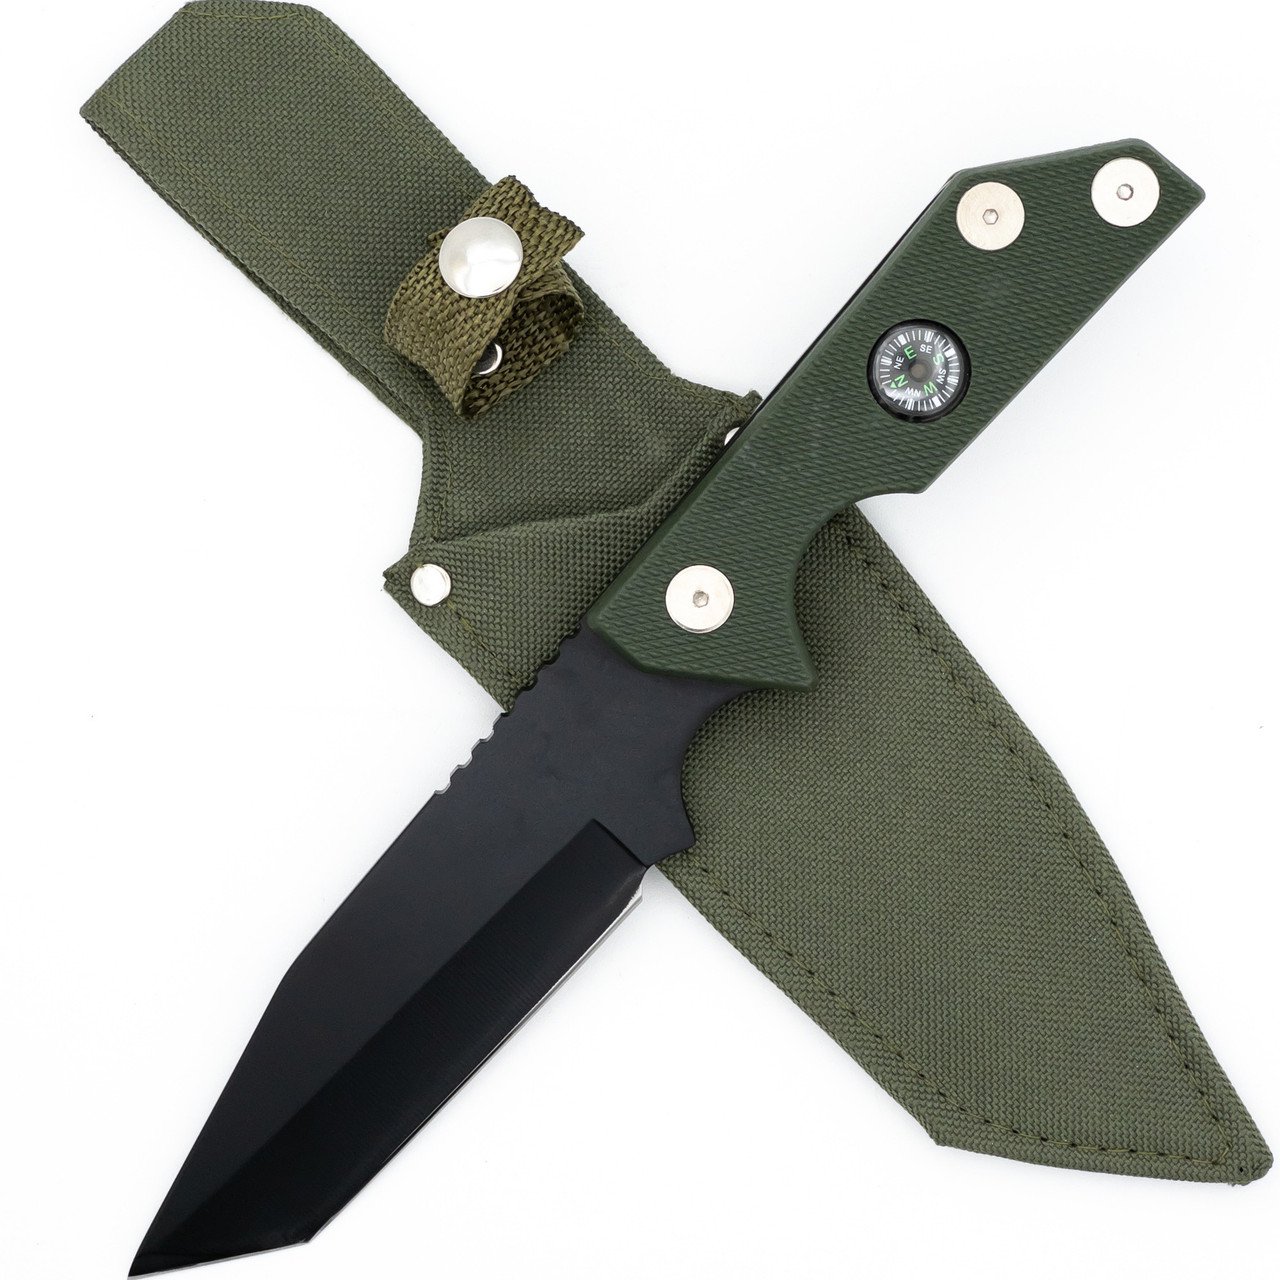 Heavily Wooded Tanto Survival Hunting Knife with Compass FREE SHIPPING